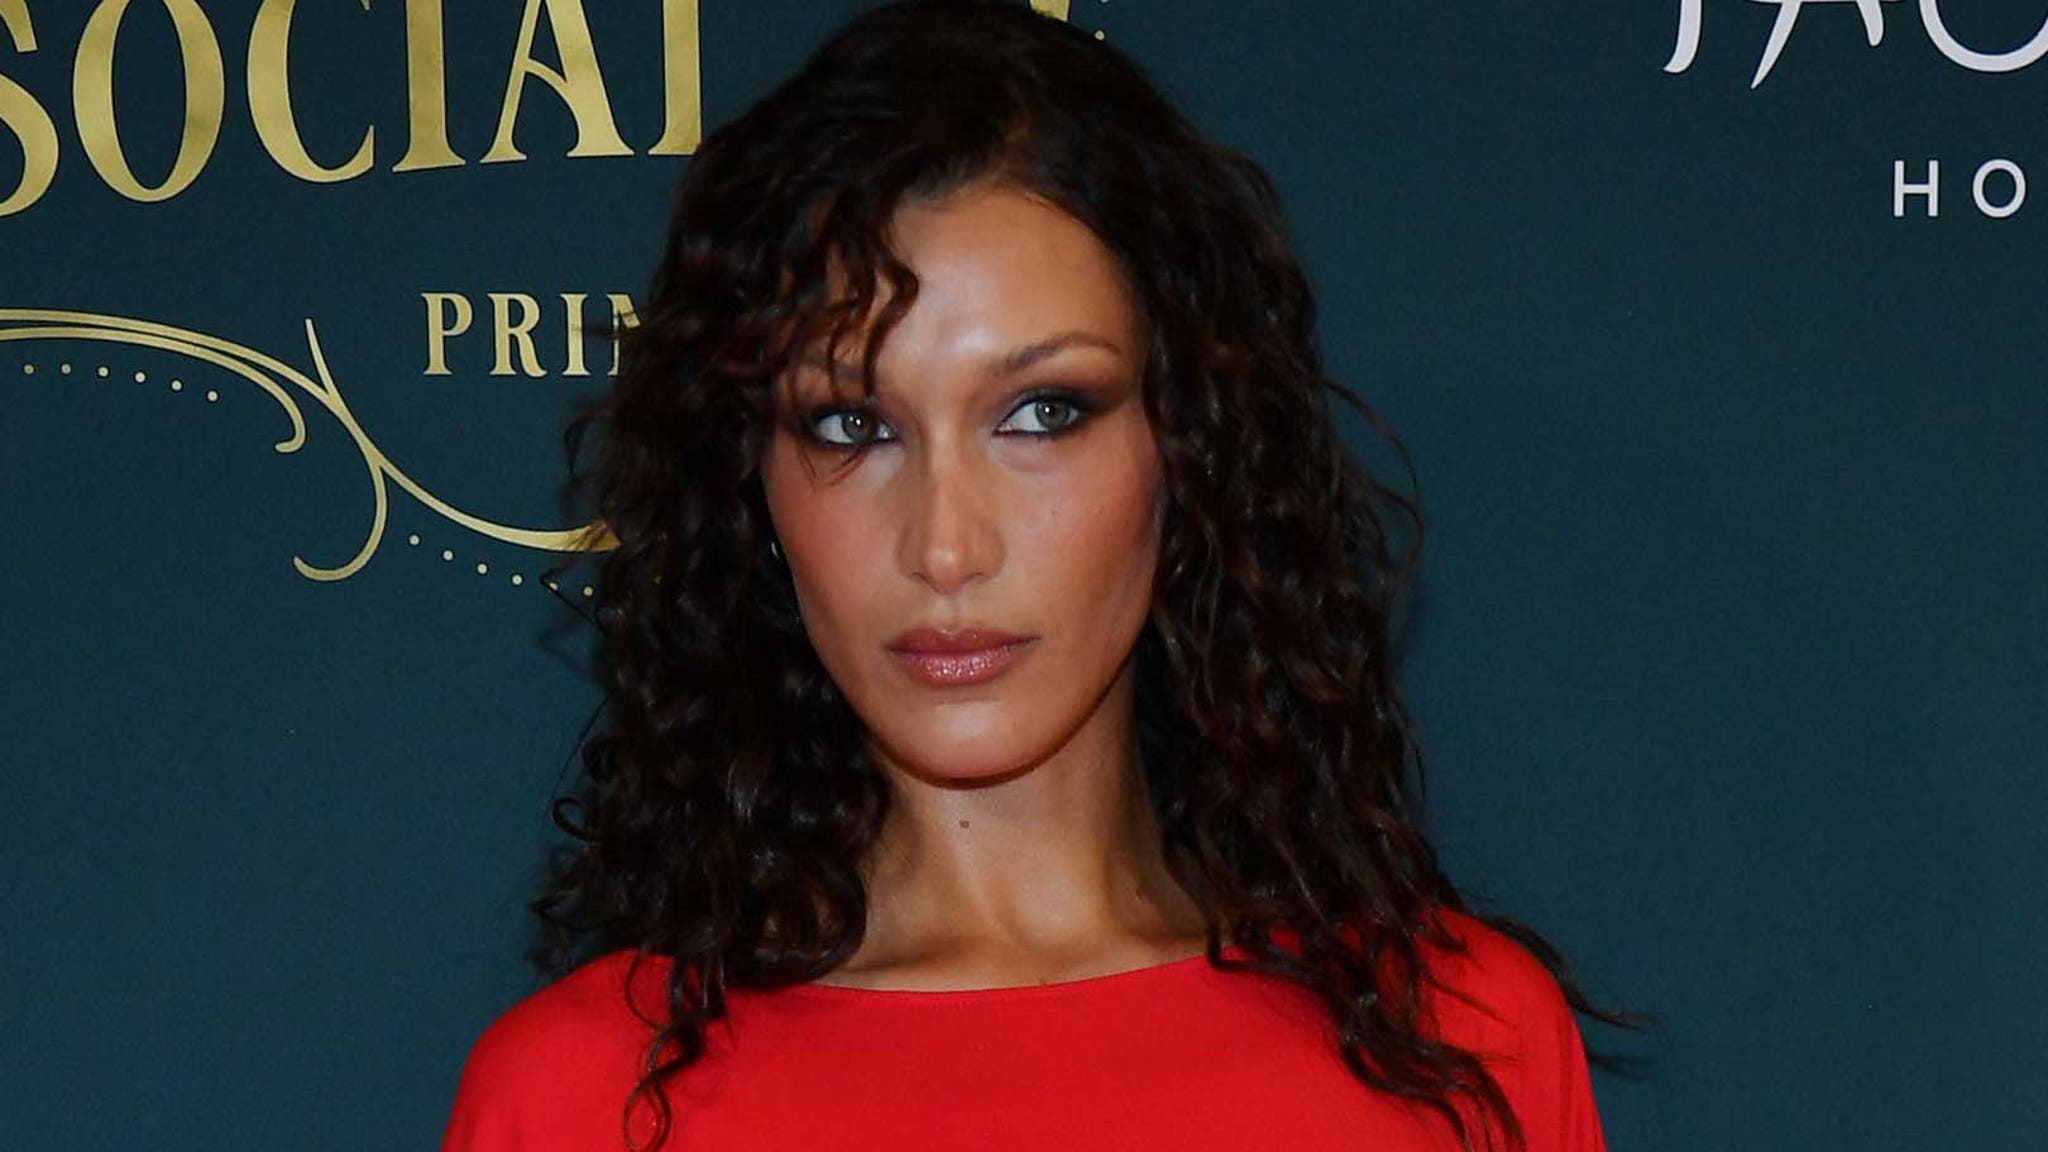 Bella Hadid opens up about her history of abusive relationships